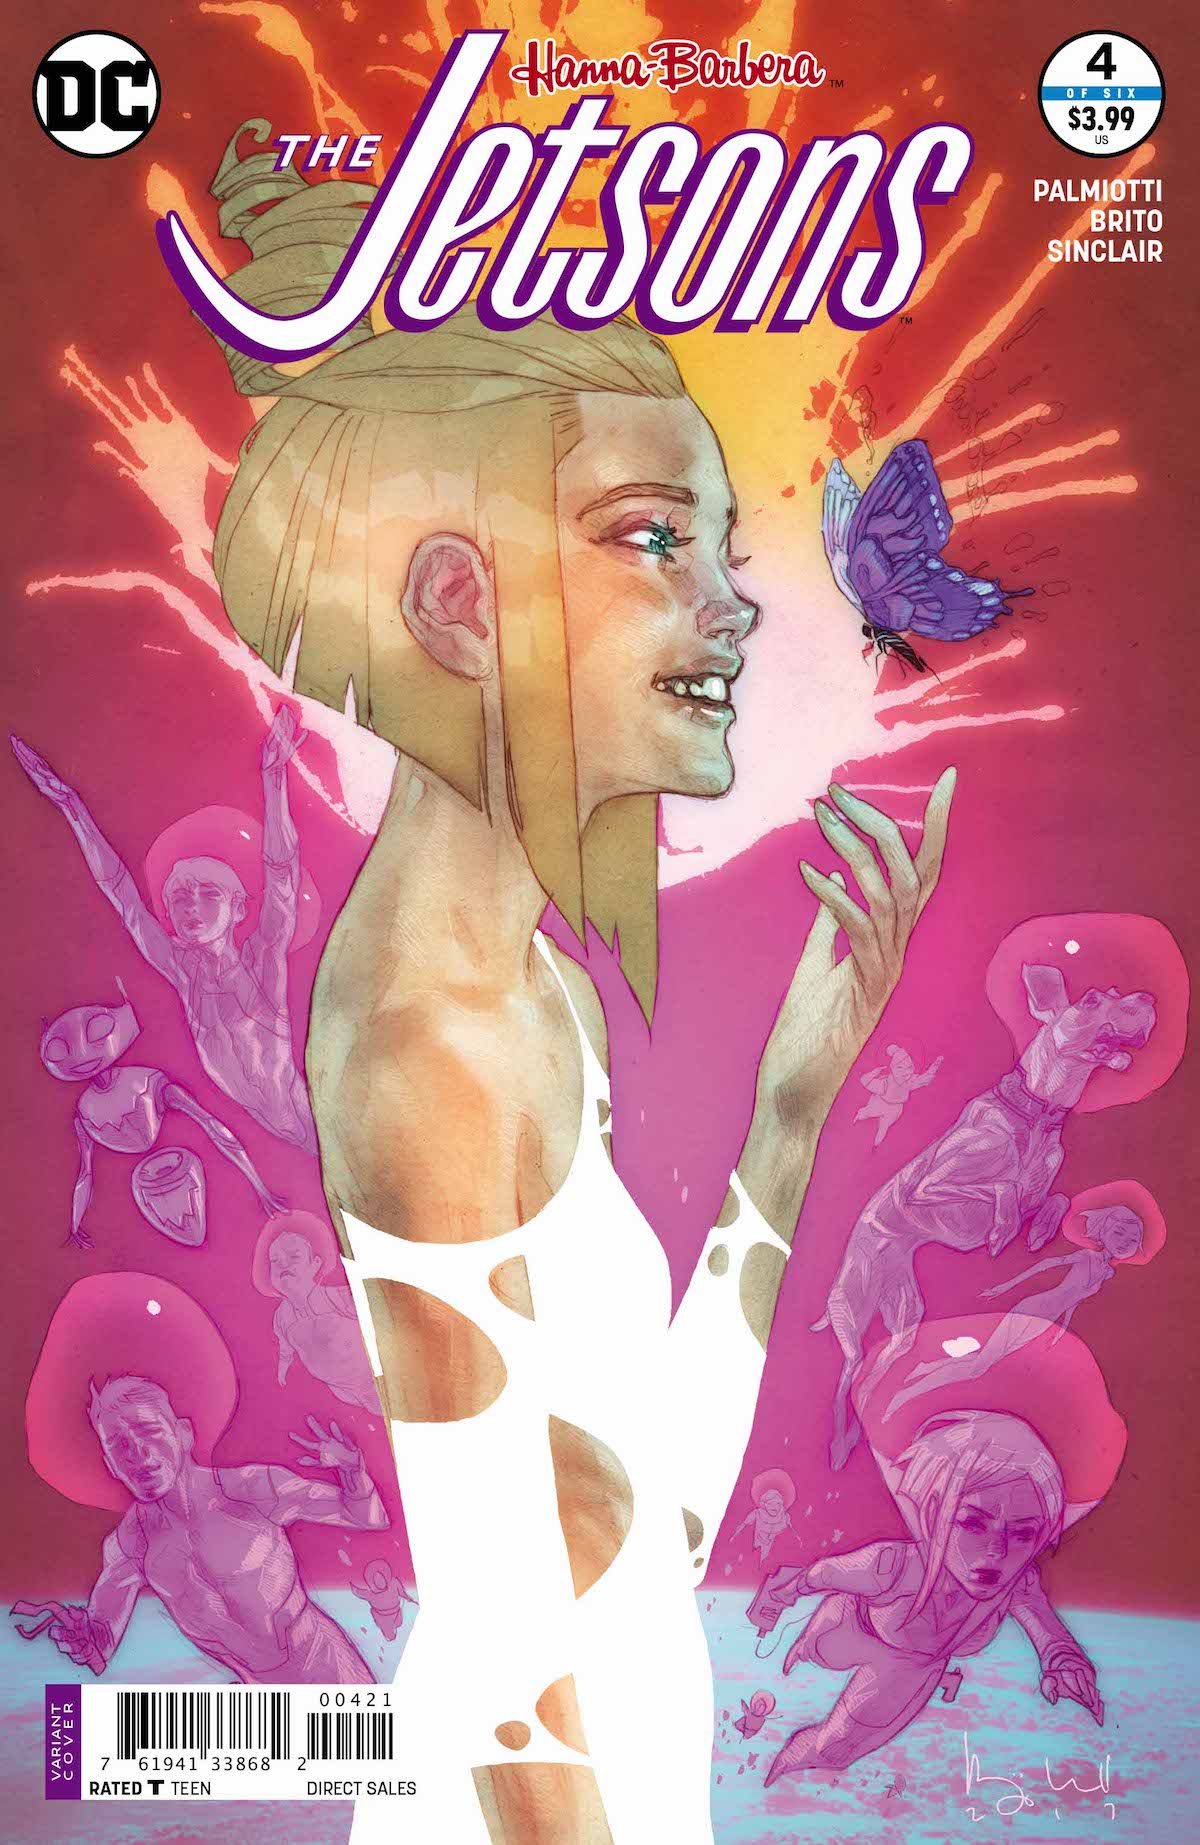 The Jetsons #4 variant cover